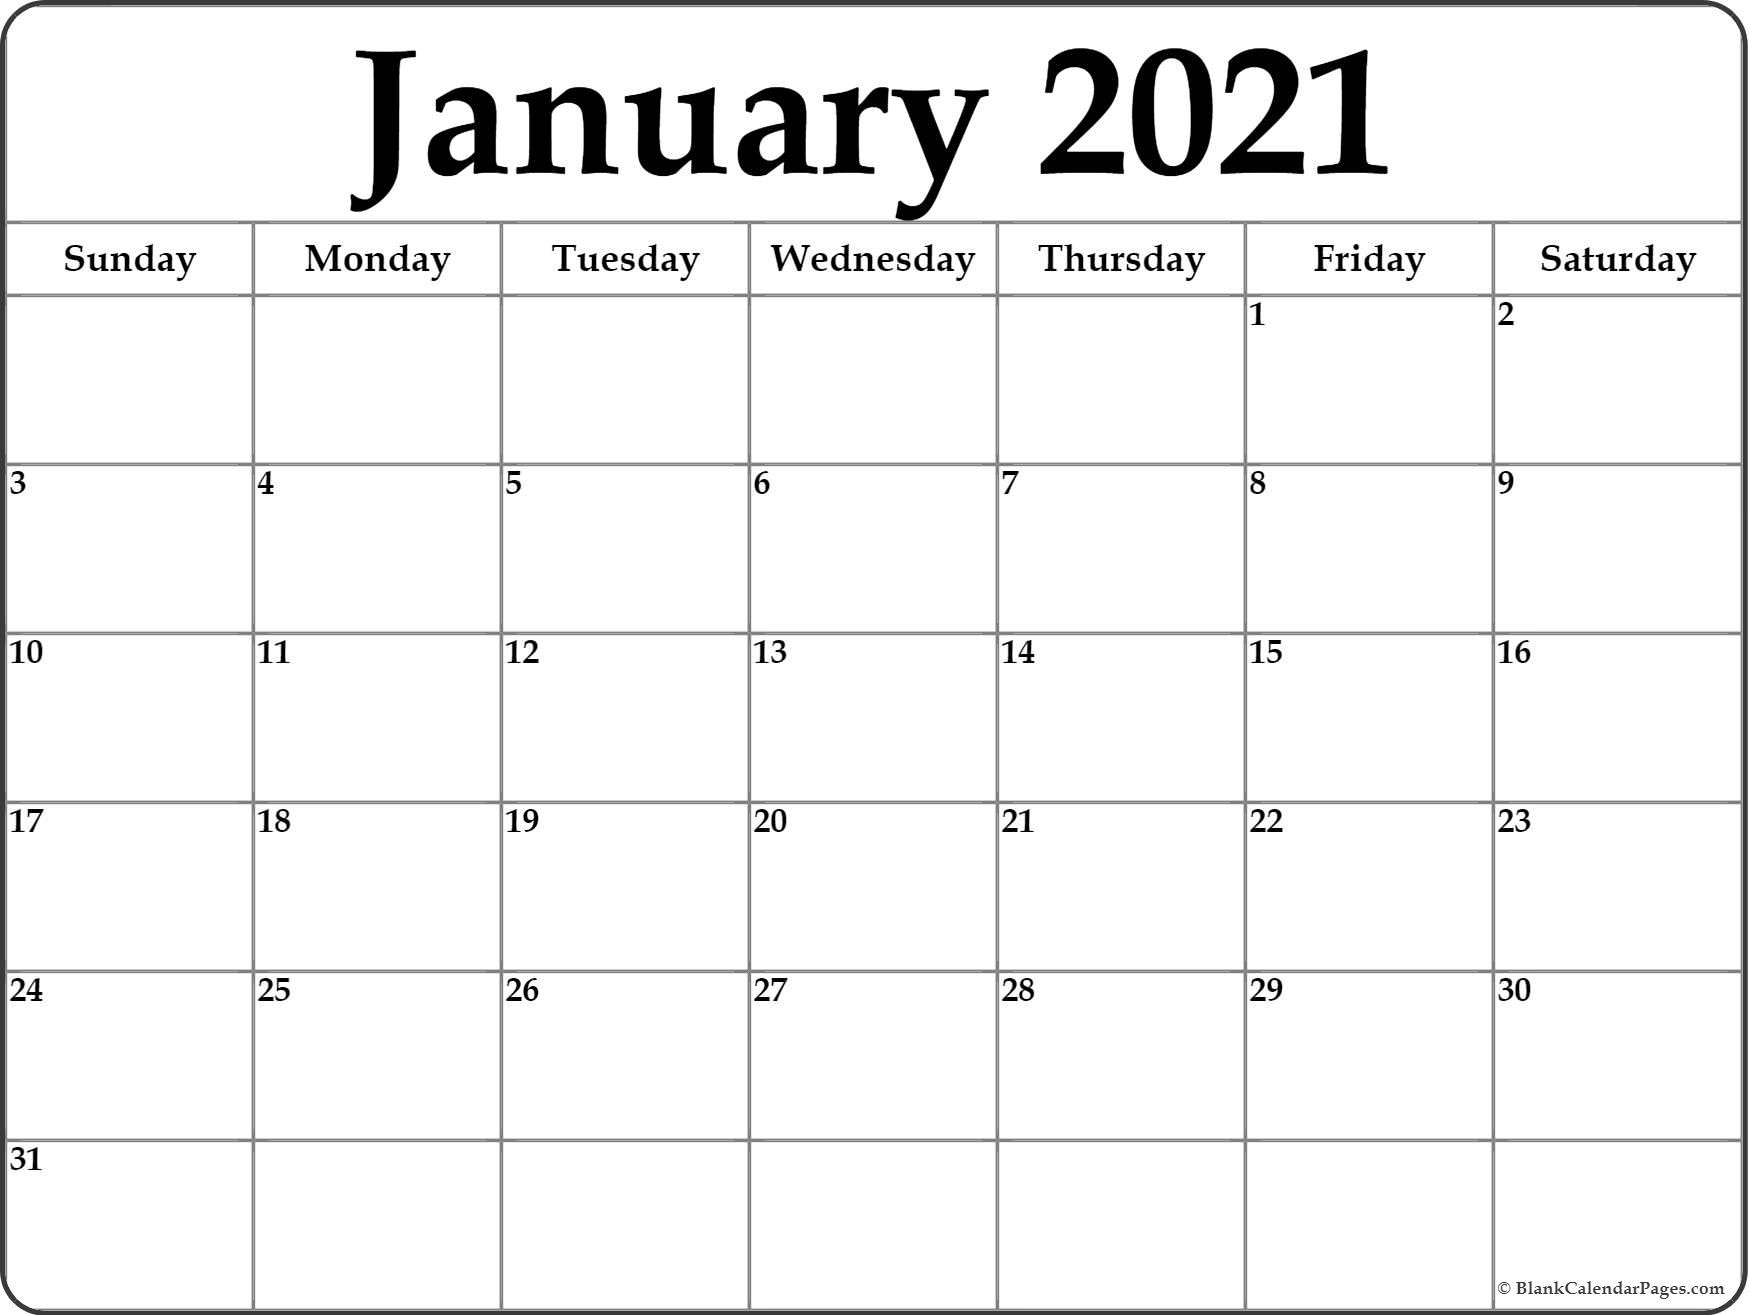 January 2021 Blank Calendar Collection.-Free Printable Calendars 2021 Monthly With Bills